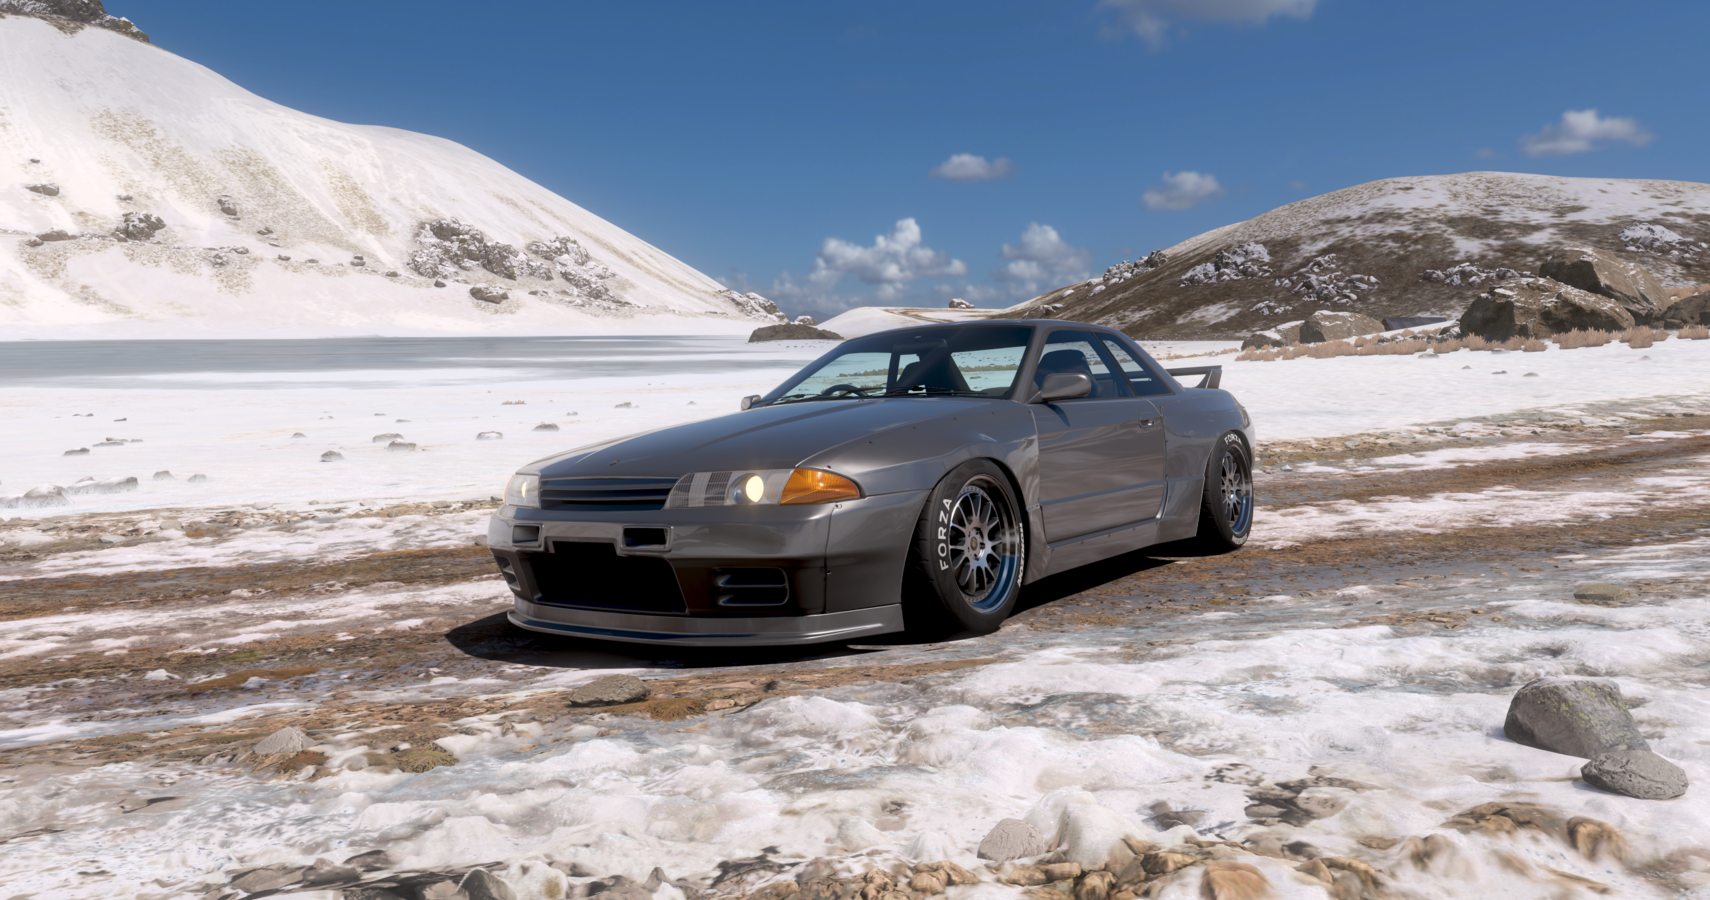 A gray Nissan GT-R R32 in FH5